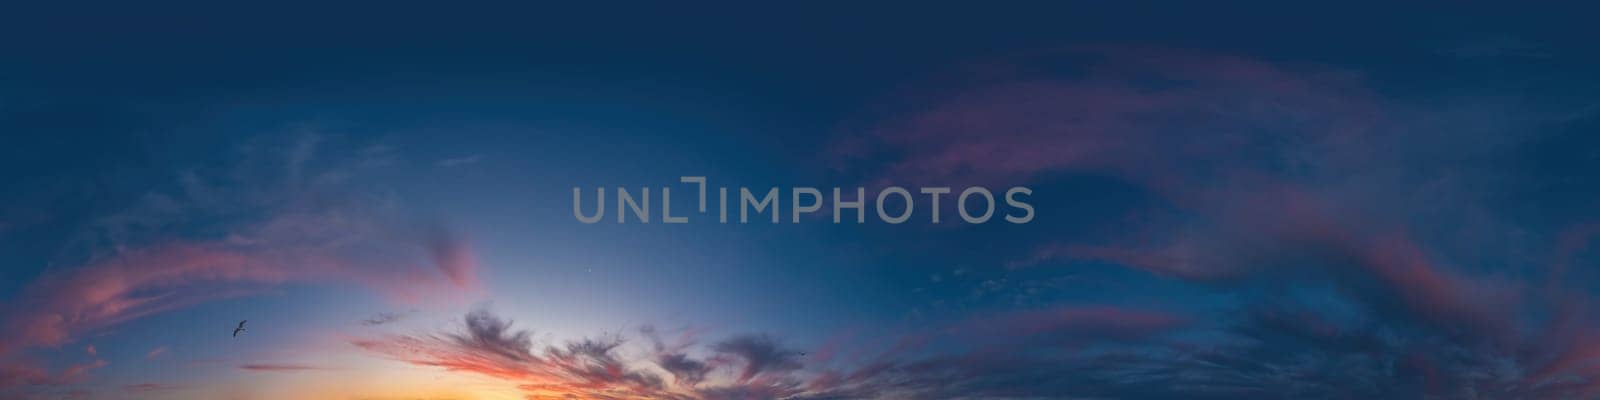 Blue evening sky seamless panorama spherical equirectangular 360 degree view with Cumulus clouds, setting sun. Full zenith for use in 3D graphics, game and aerial drone panoramas as sky replacement. by Matiunina